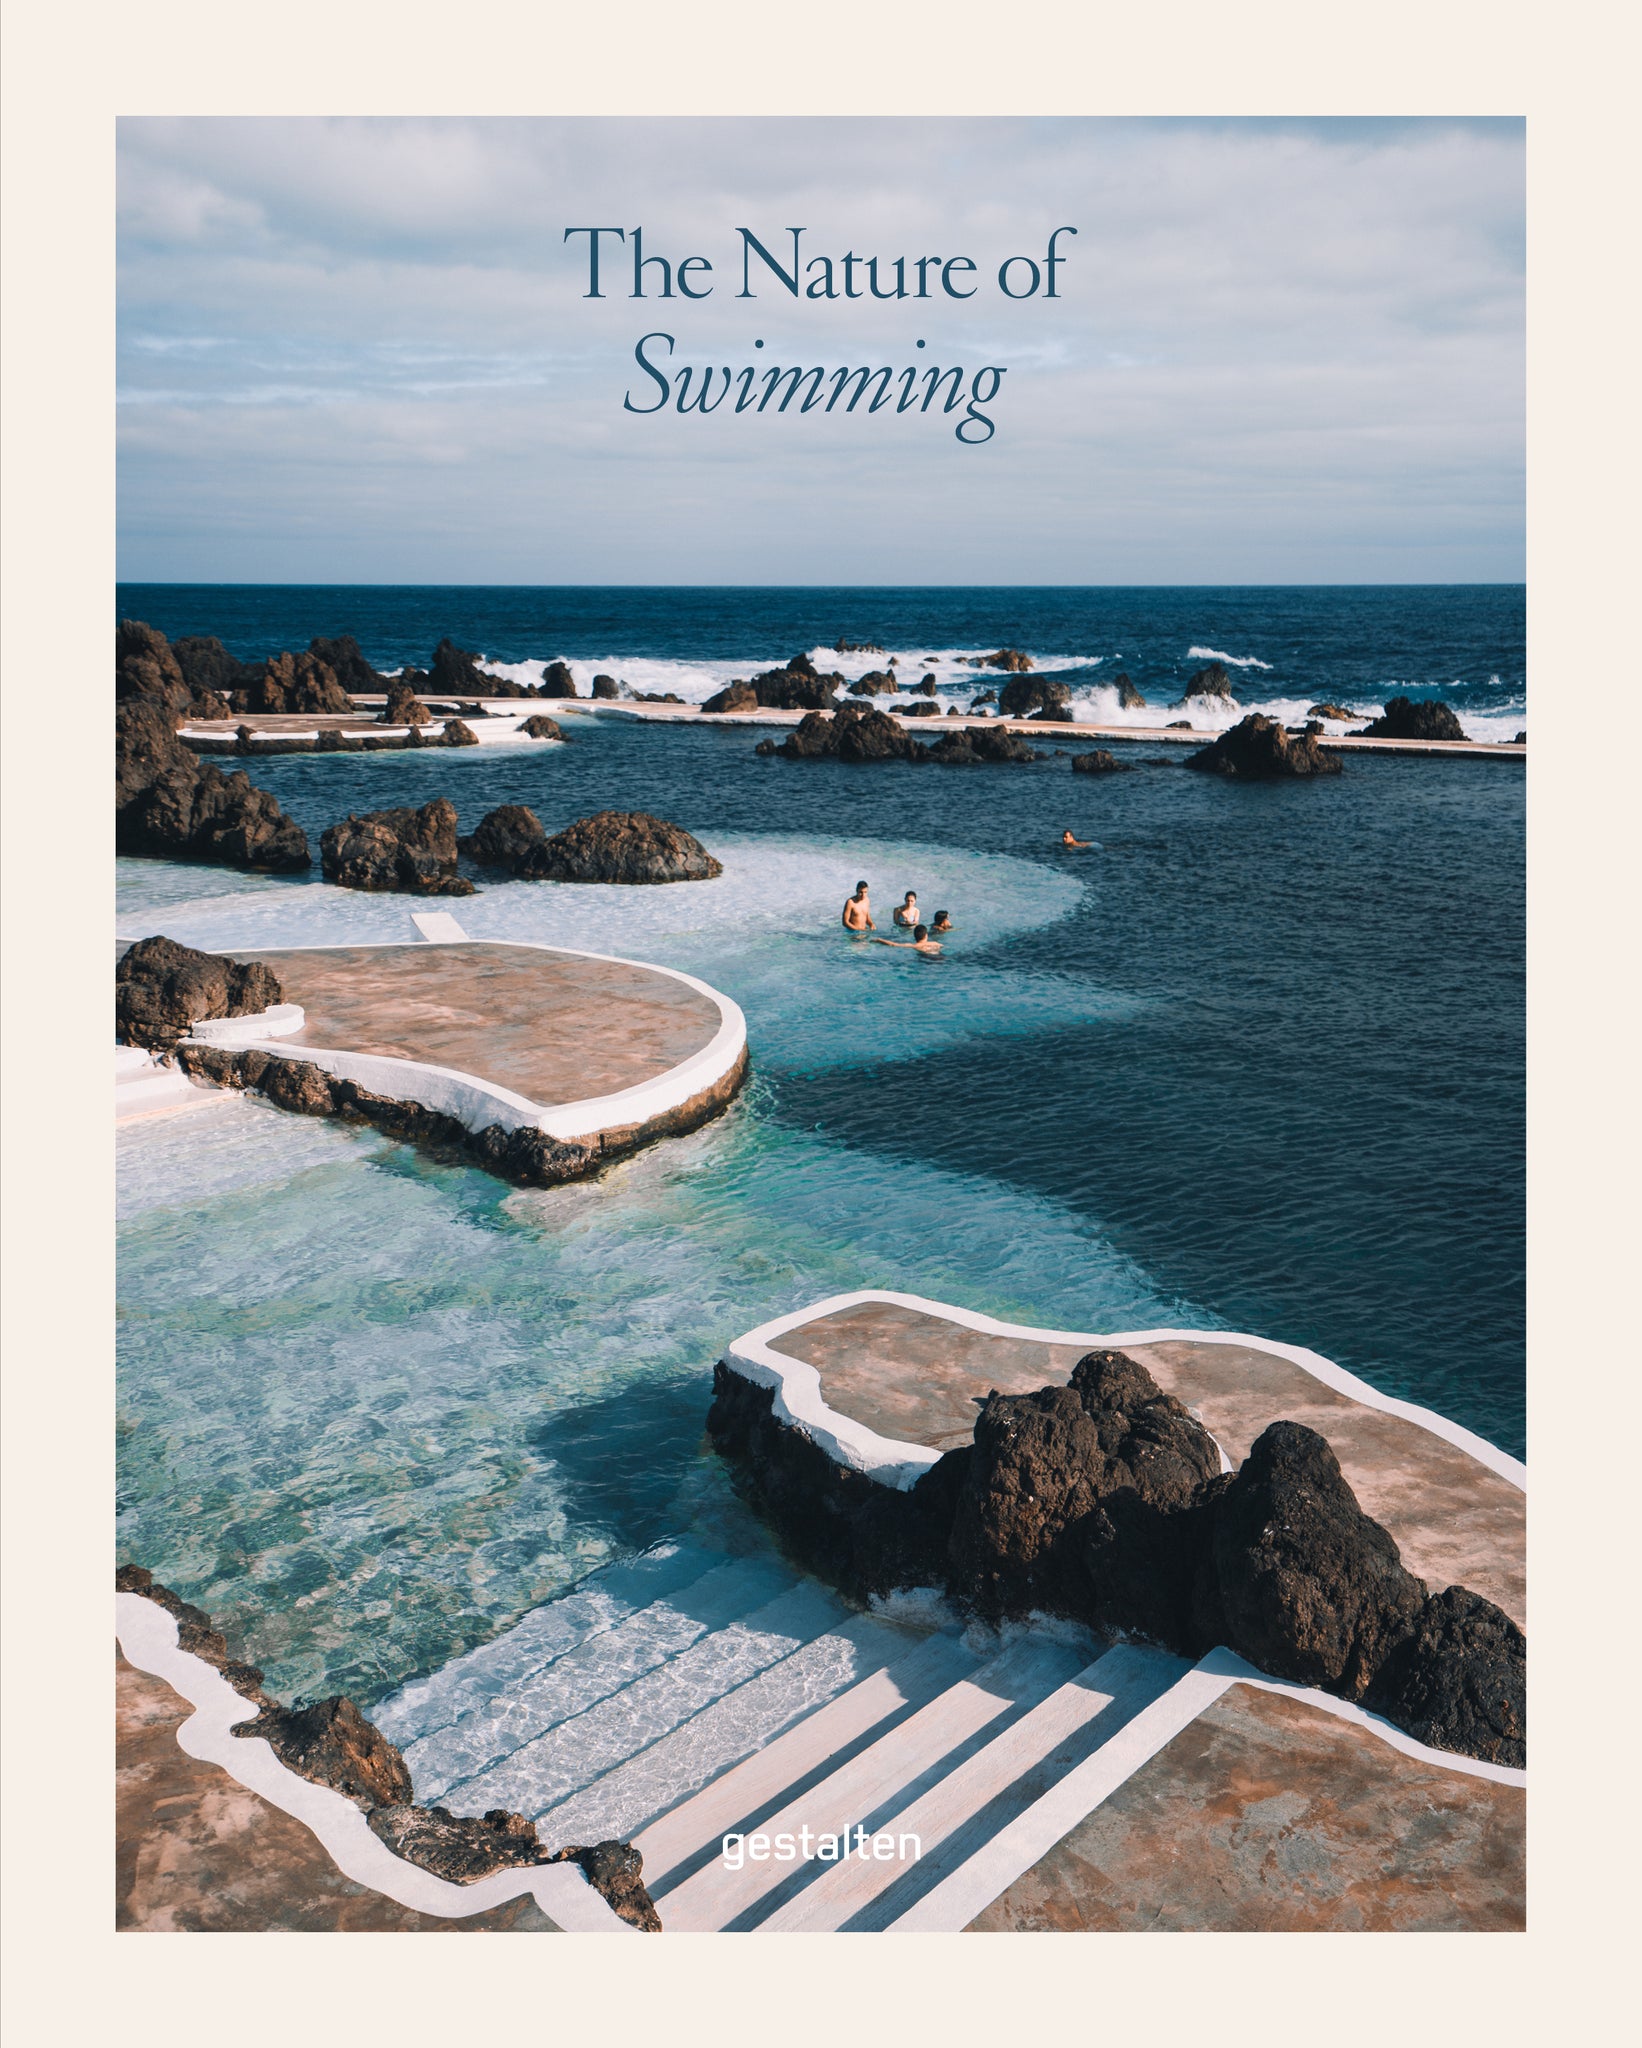 Nature of Swimming, the: Unique Bathing Locations and Swimming Experiences (announced as The Nature of Bathing) cover